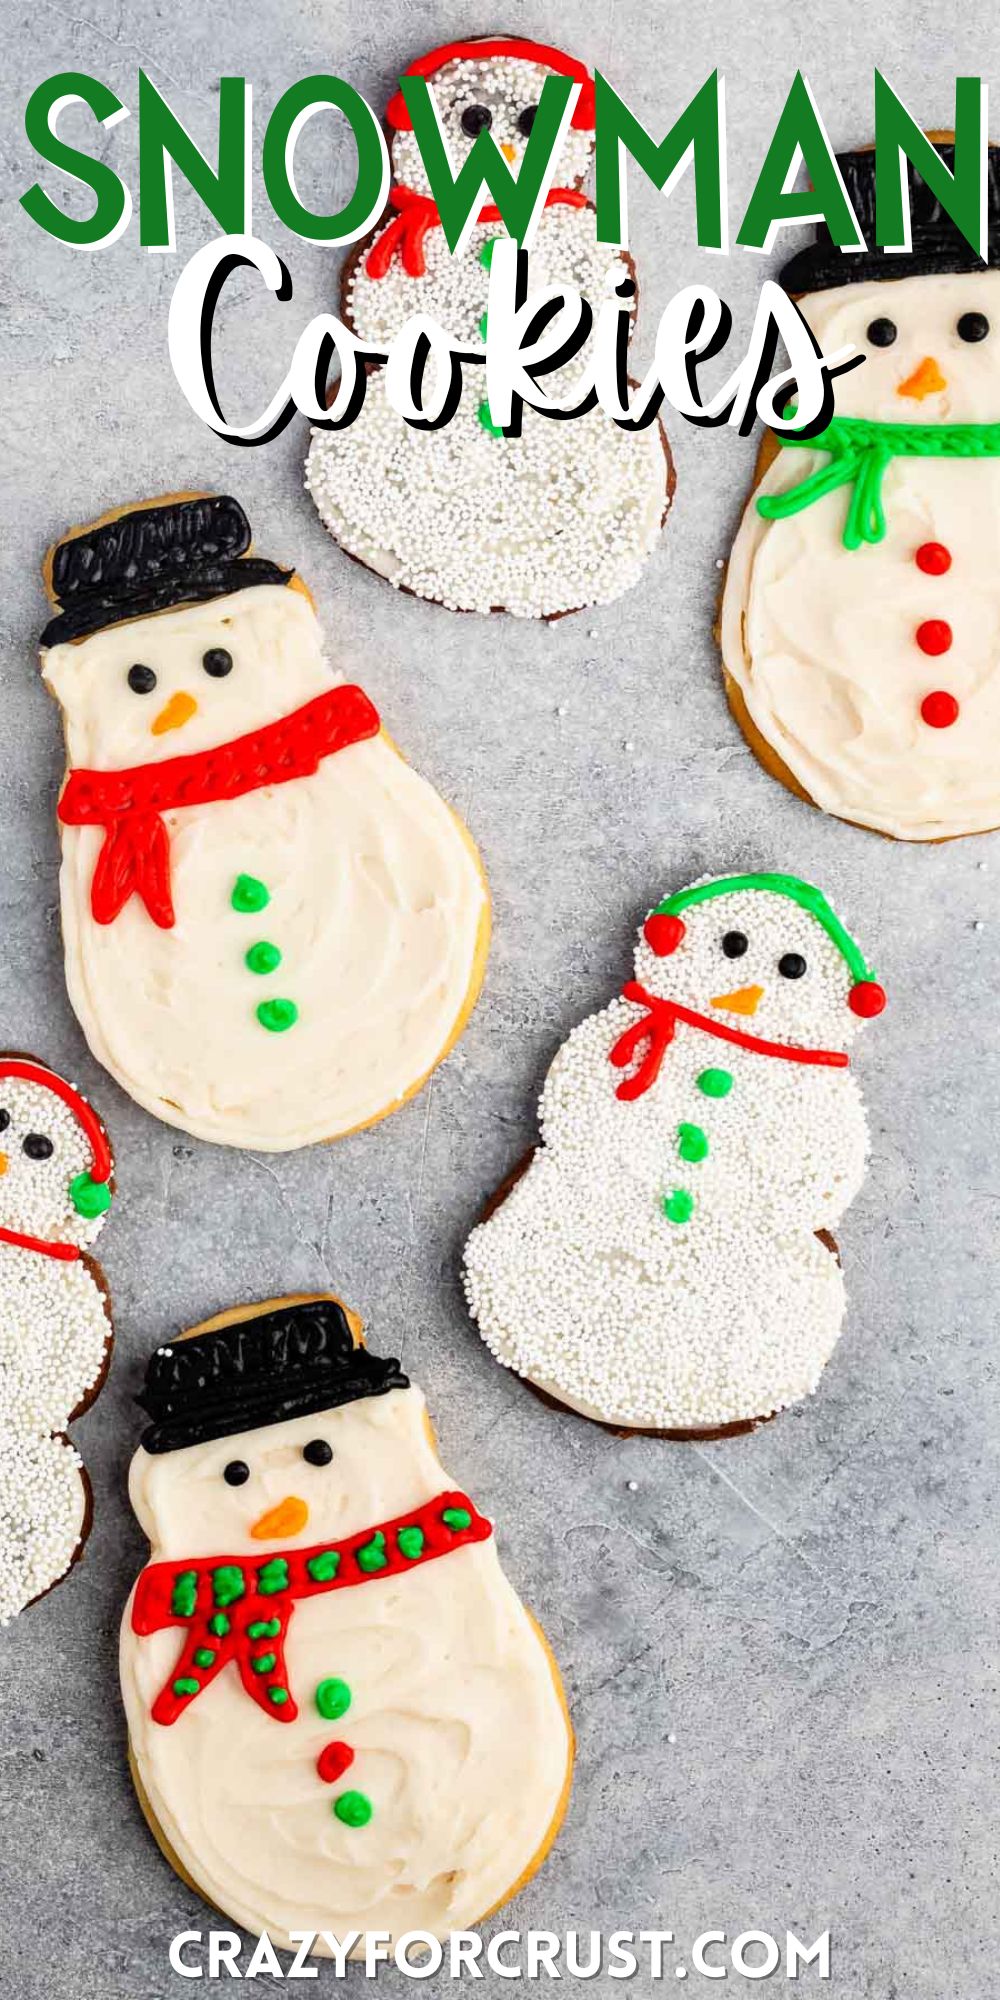 snowman cookies covered in white frosting and sprinkles and icing to replicate a snowman with words on the image.